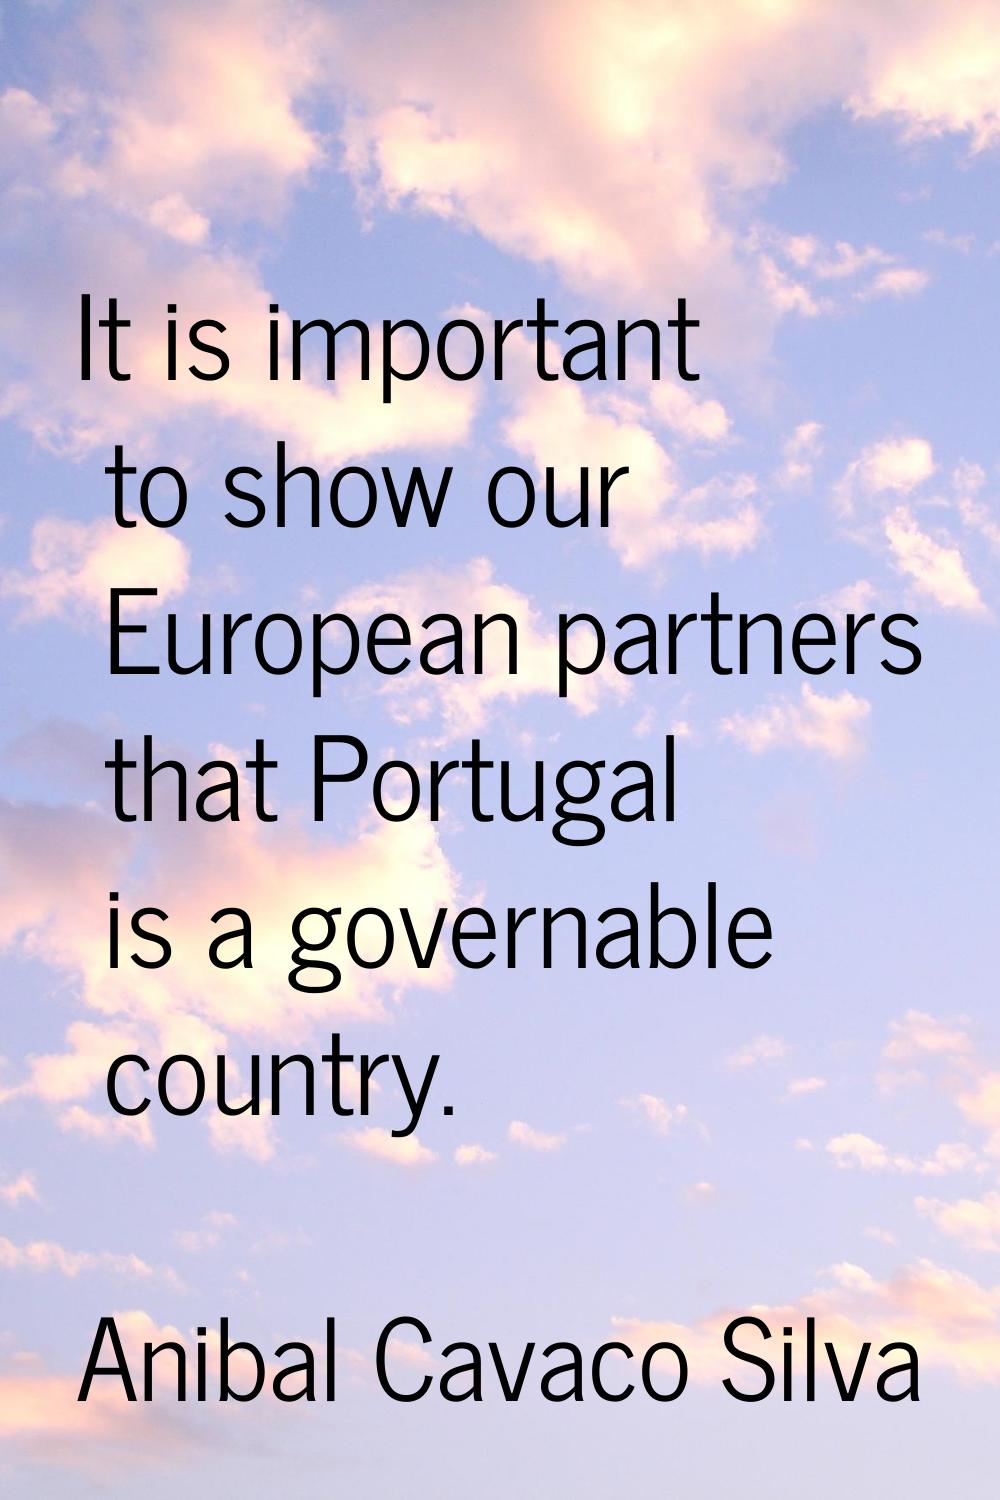 It is important to show our European partners that Portugal is a governable country.